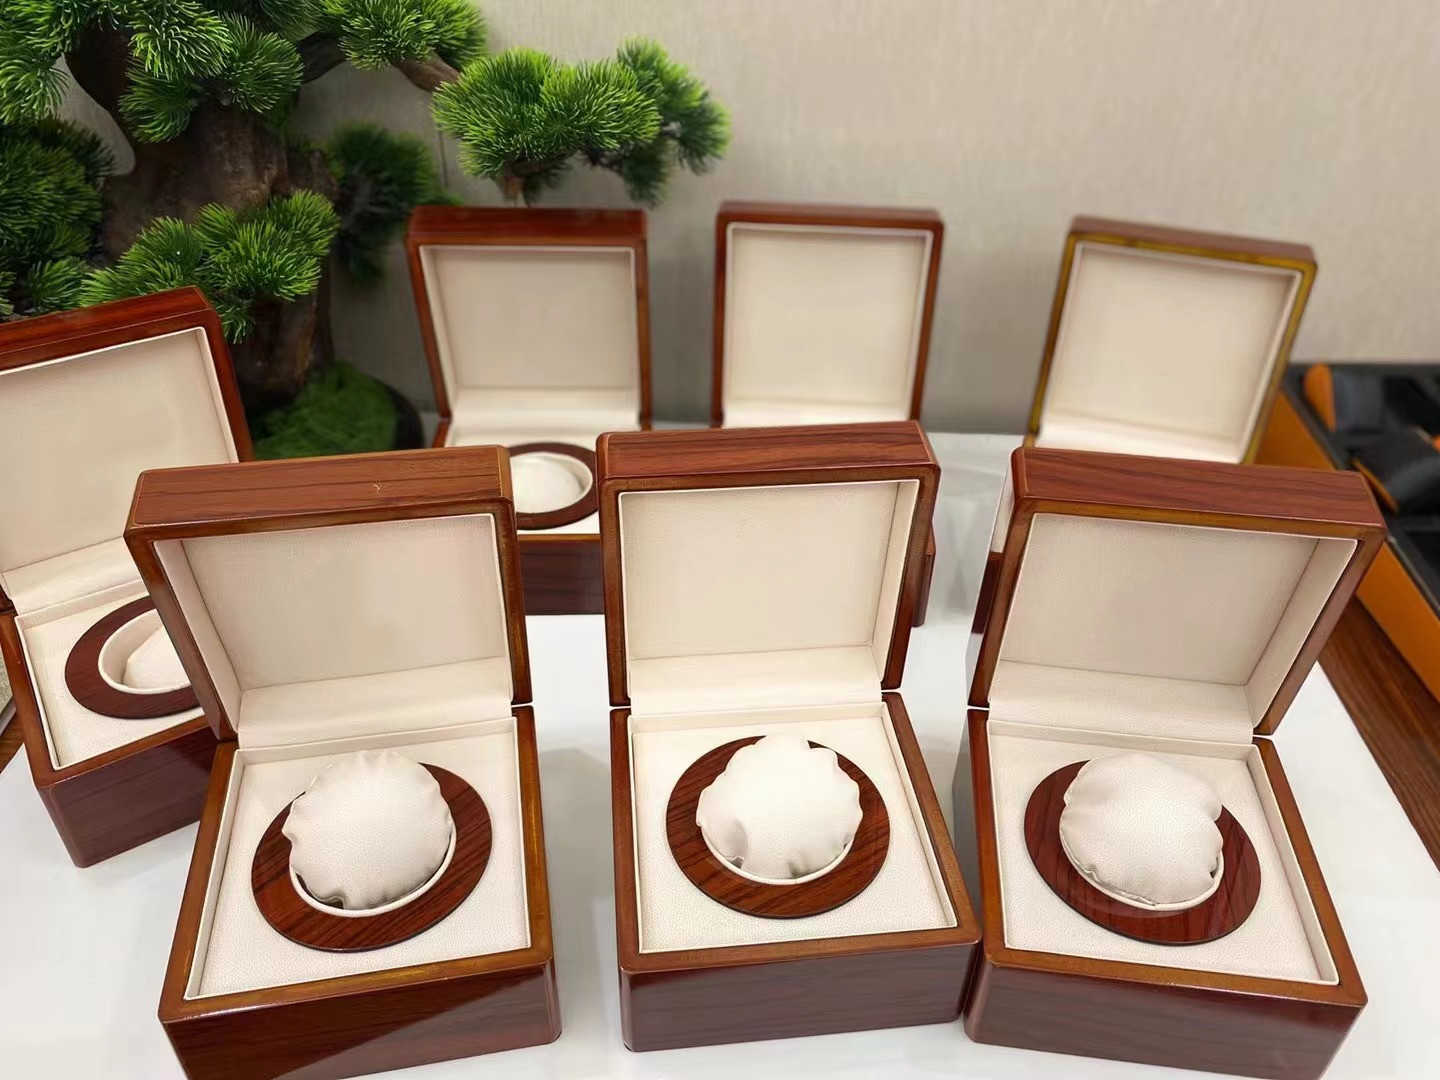 High boxes square wooden watch box brochure paper ribbon gift bag for many watches logo boxes281P